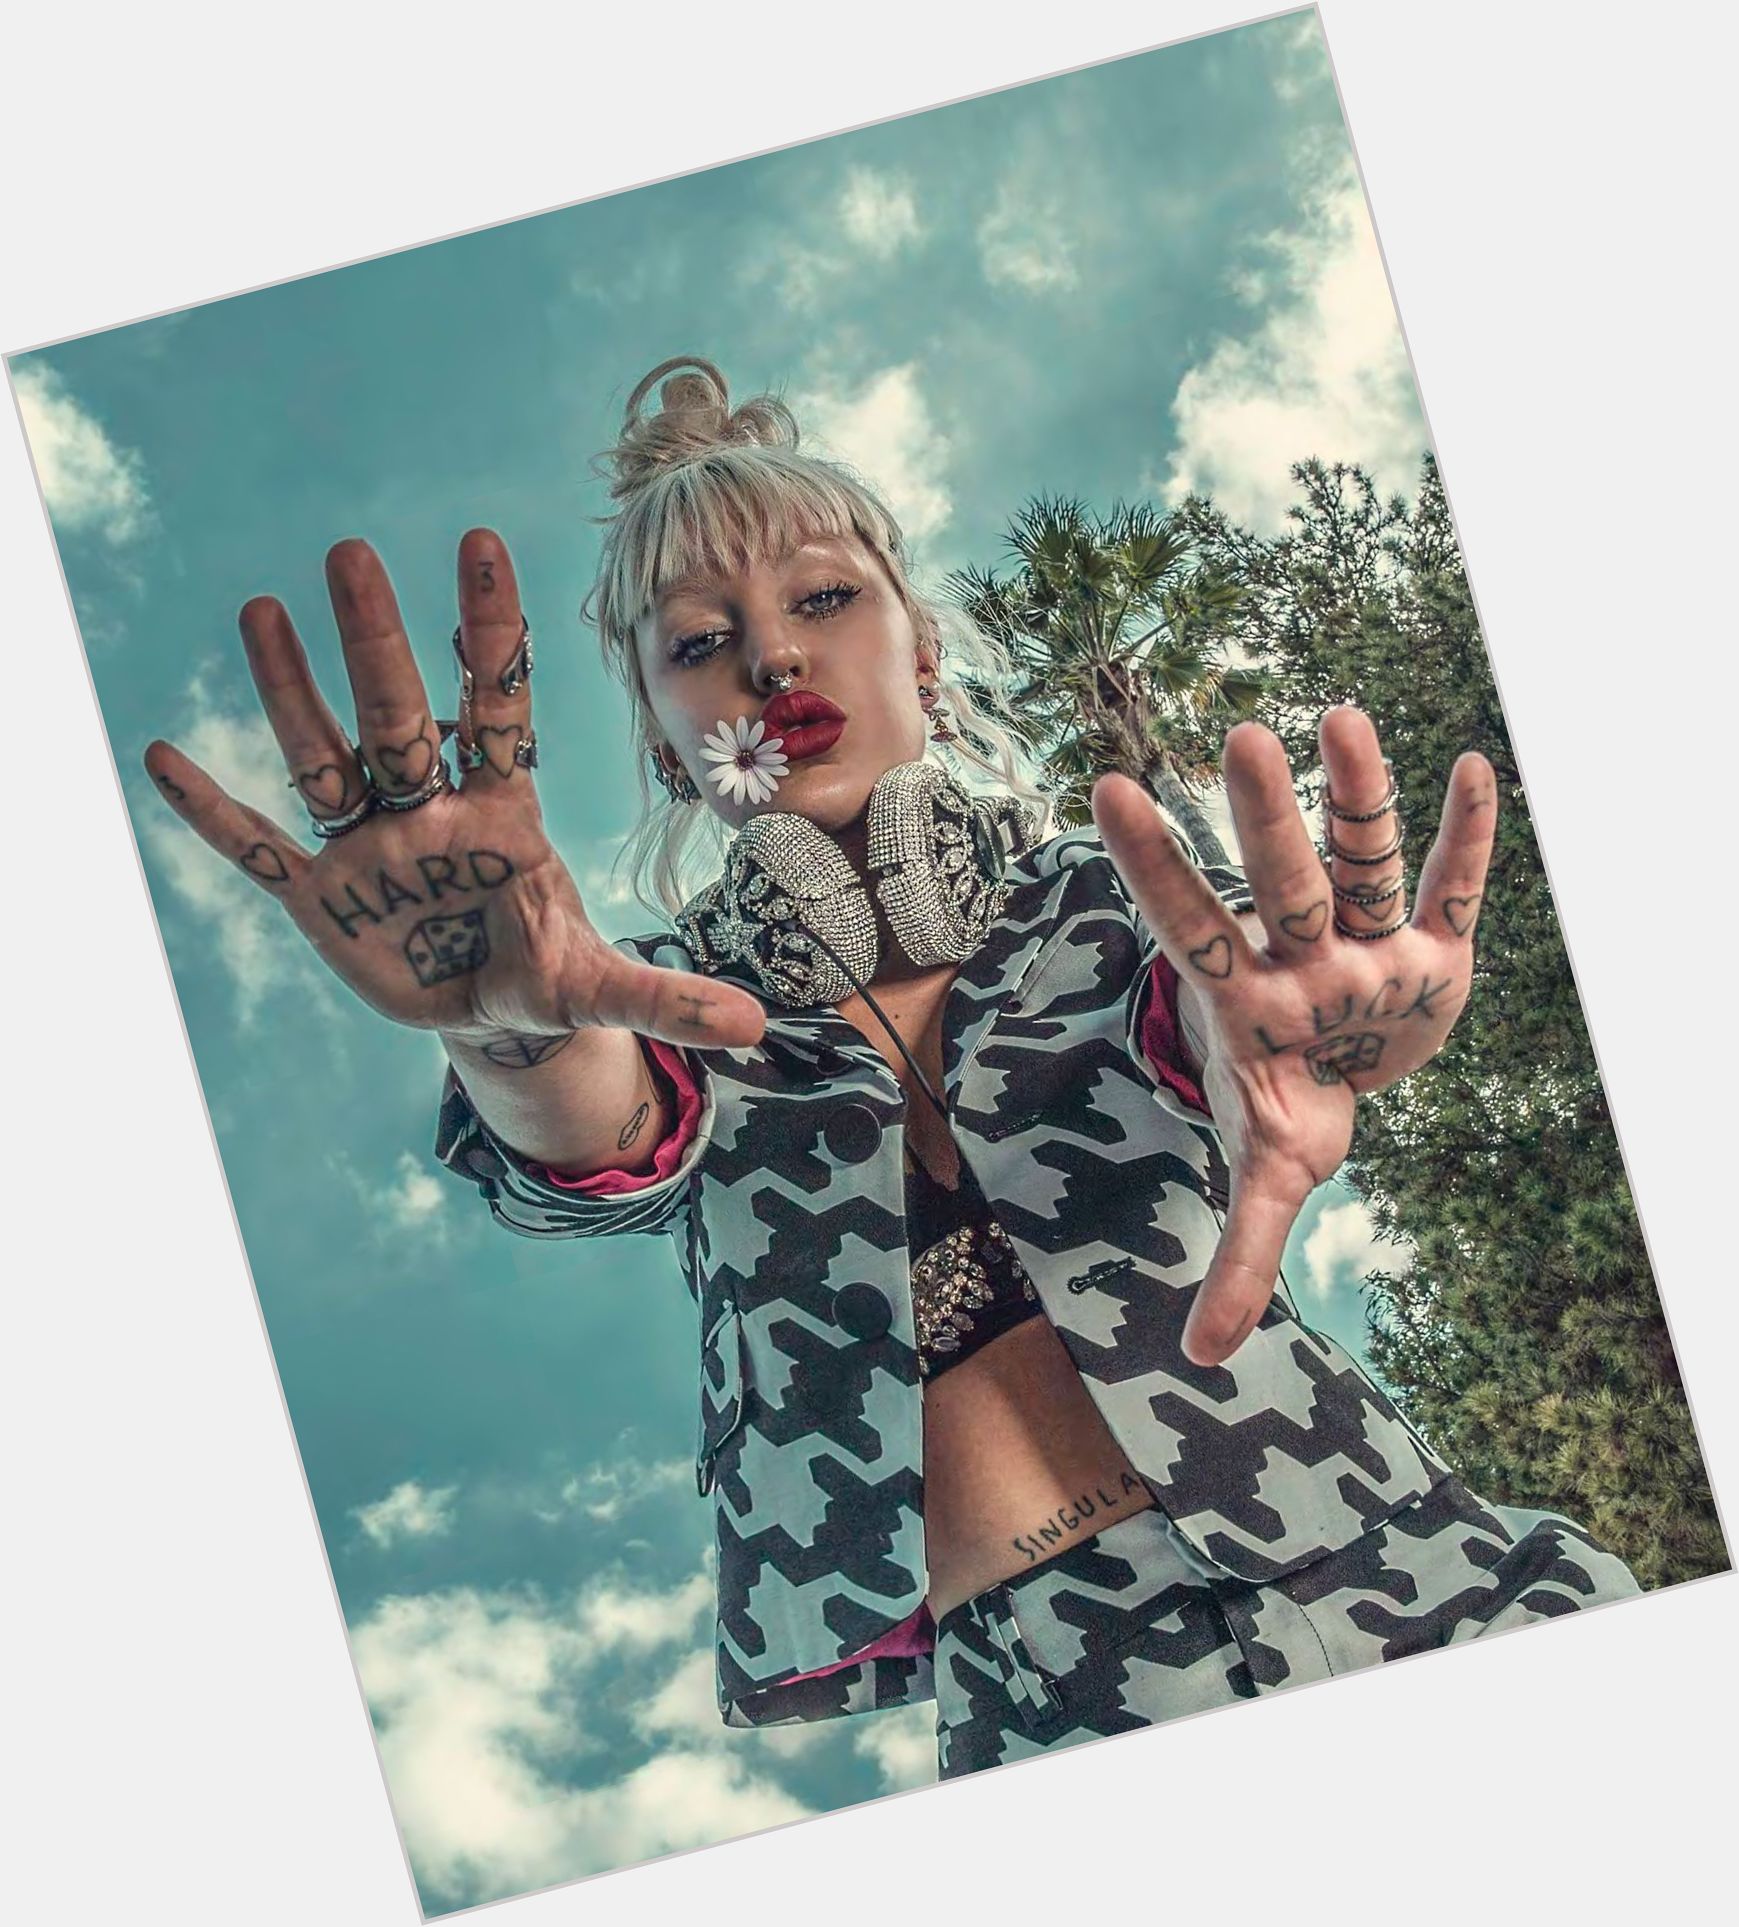 <a href="/hot-women/brooke-candy/where-dating-news-photos">Brooke Candy</a> Slim body,  